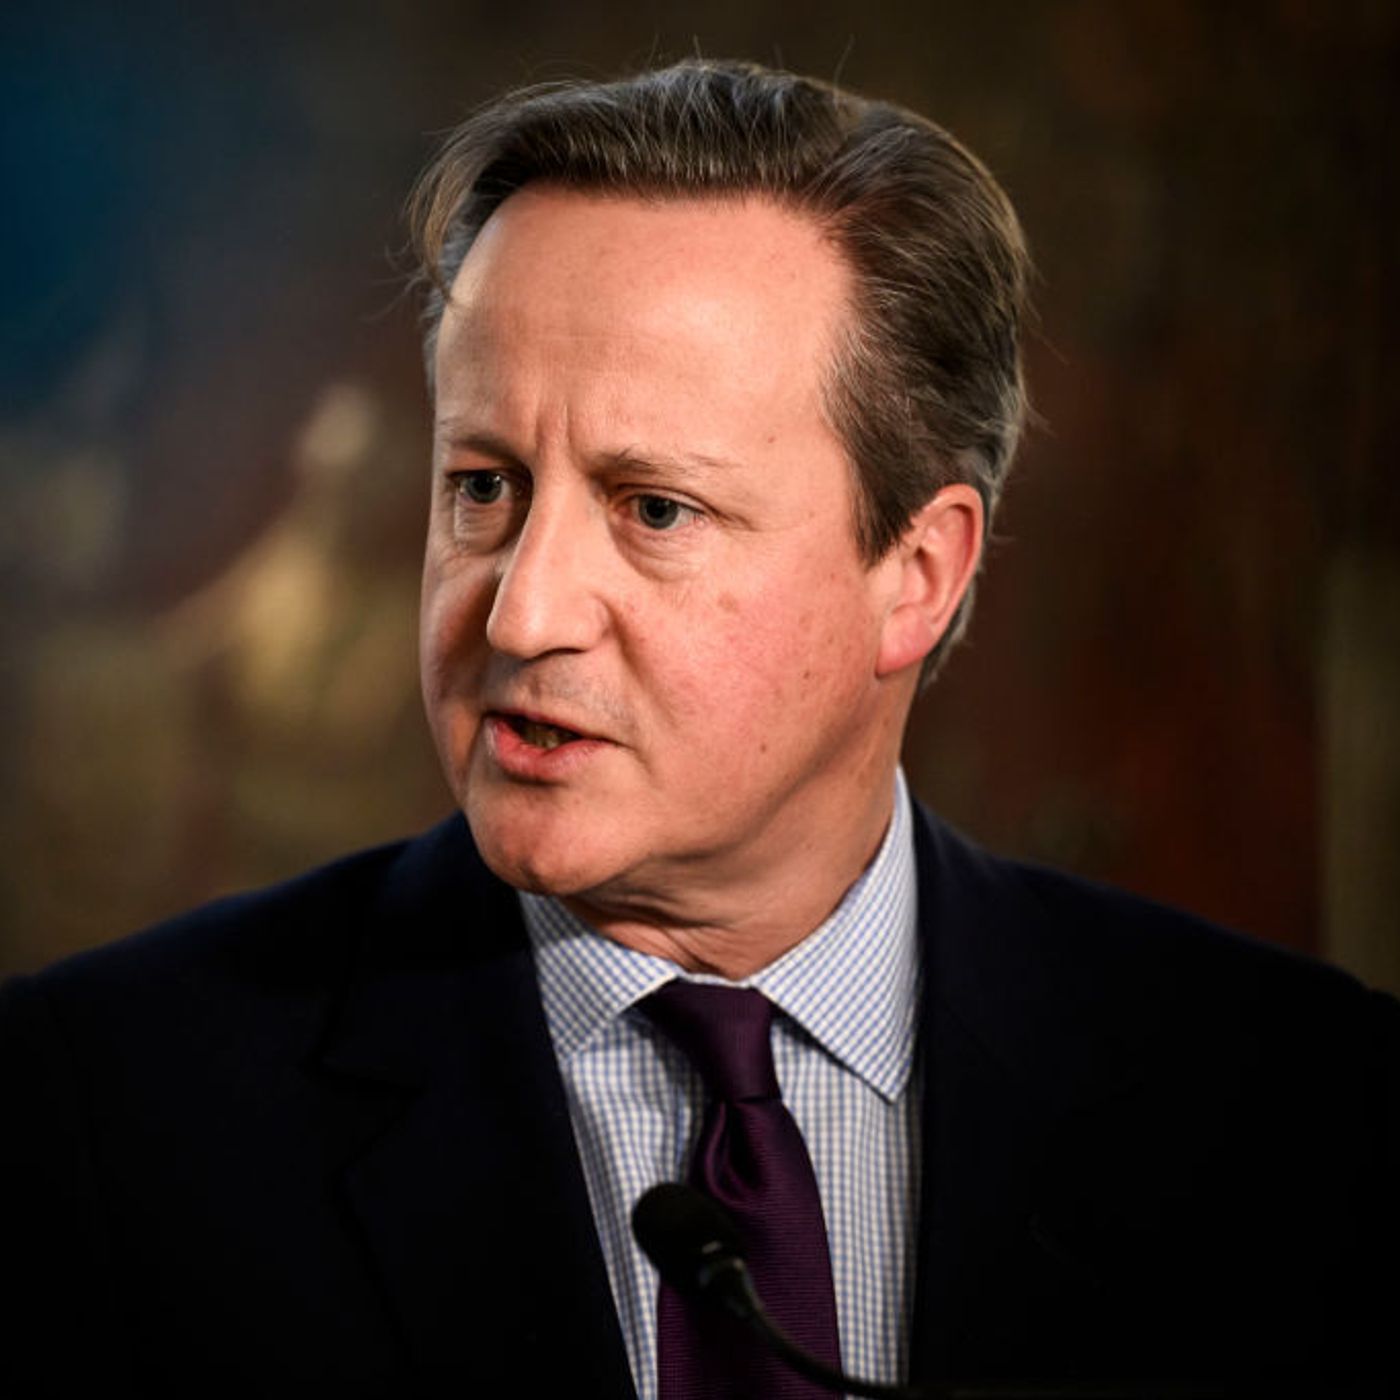 Americano: What do Republicans think of Lord Cameron?